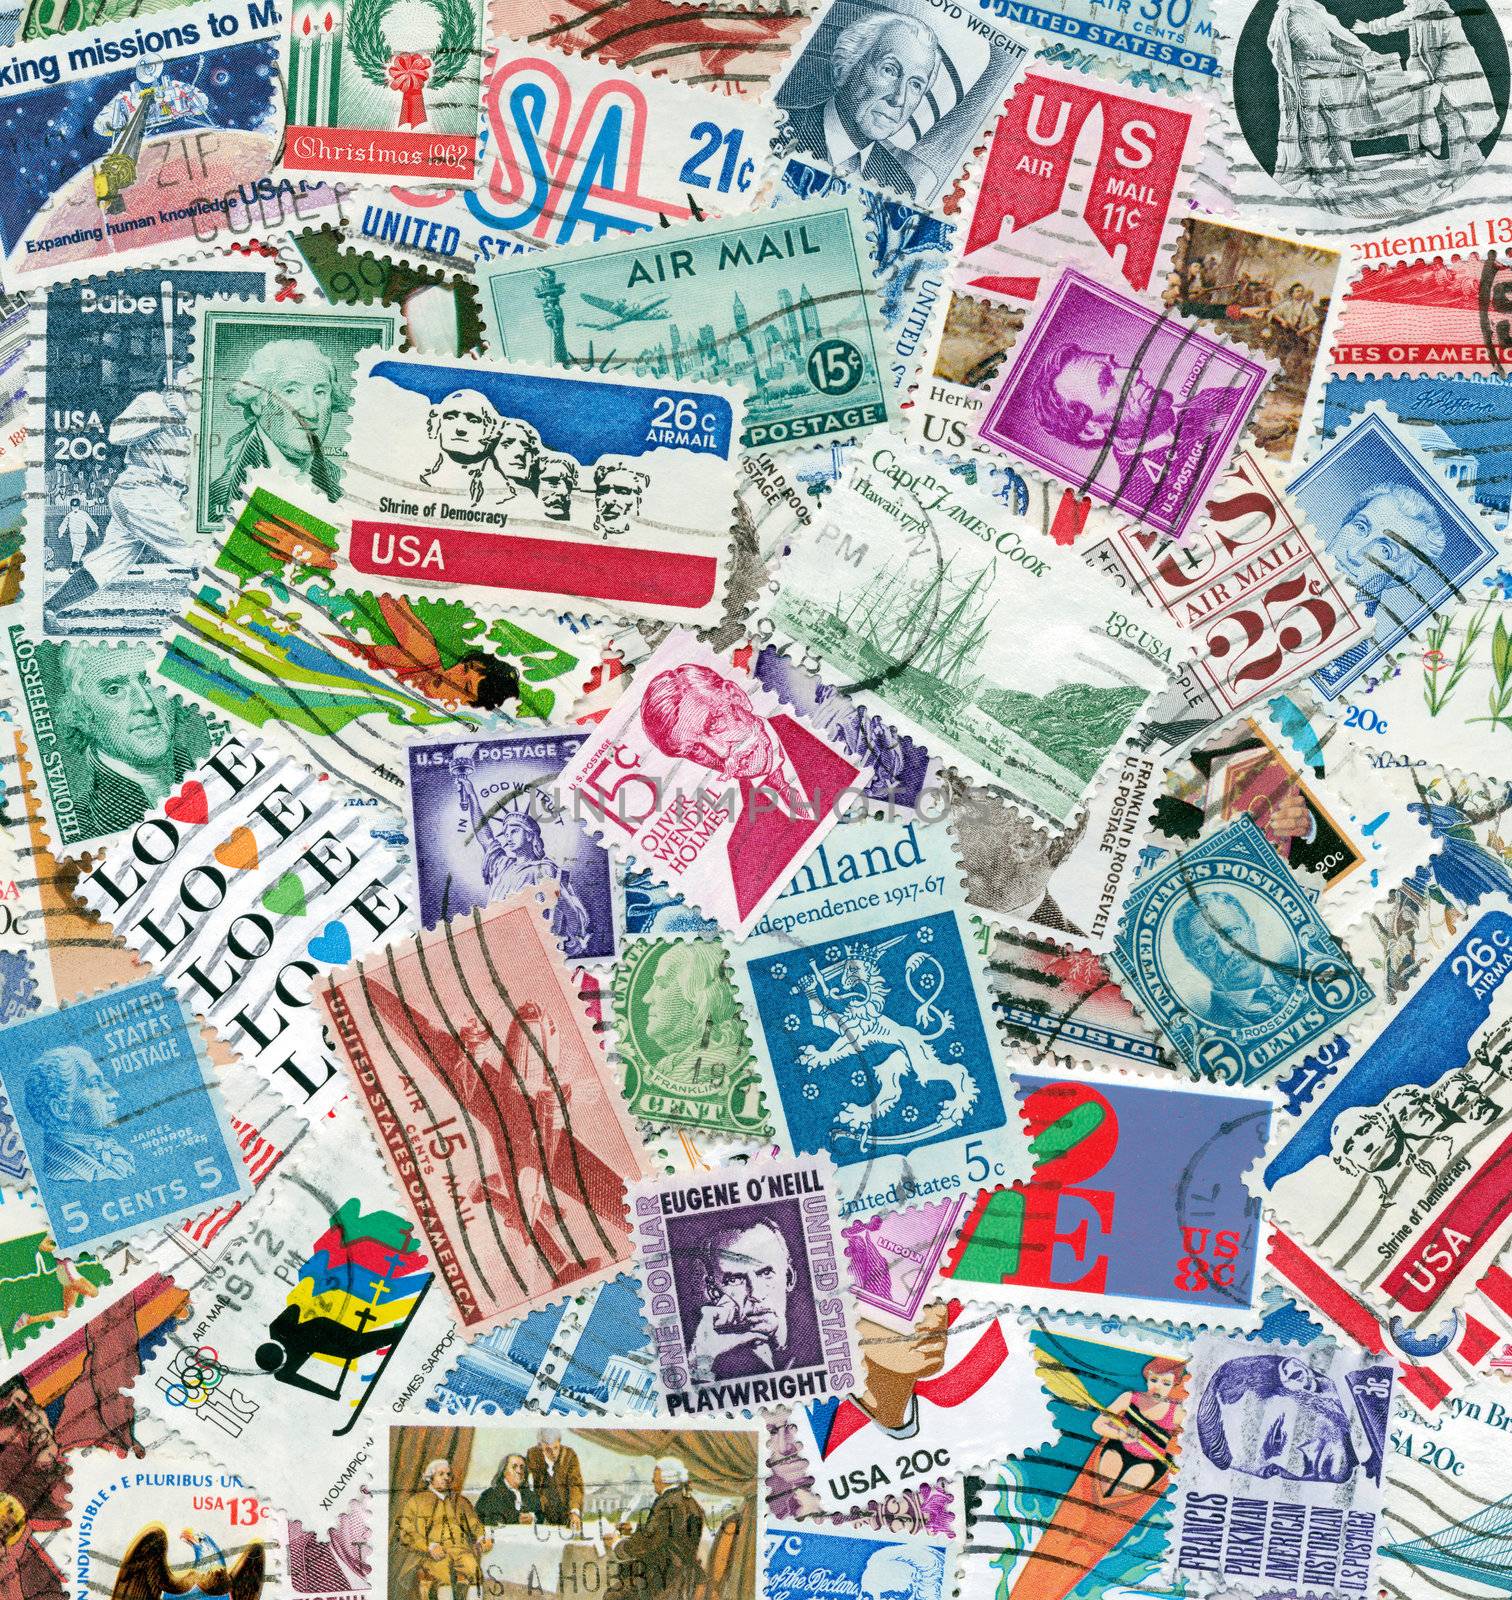 Used and cancelled stamps from USA